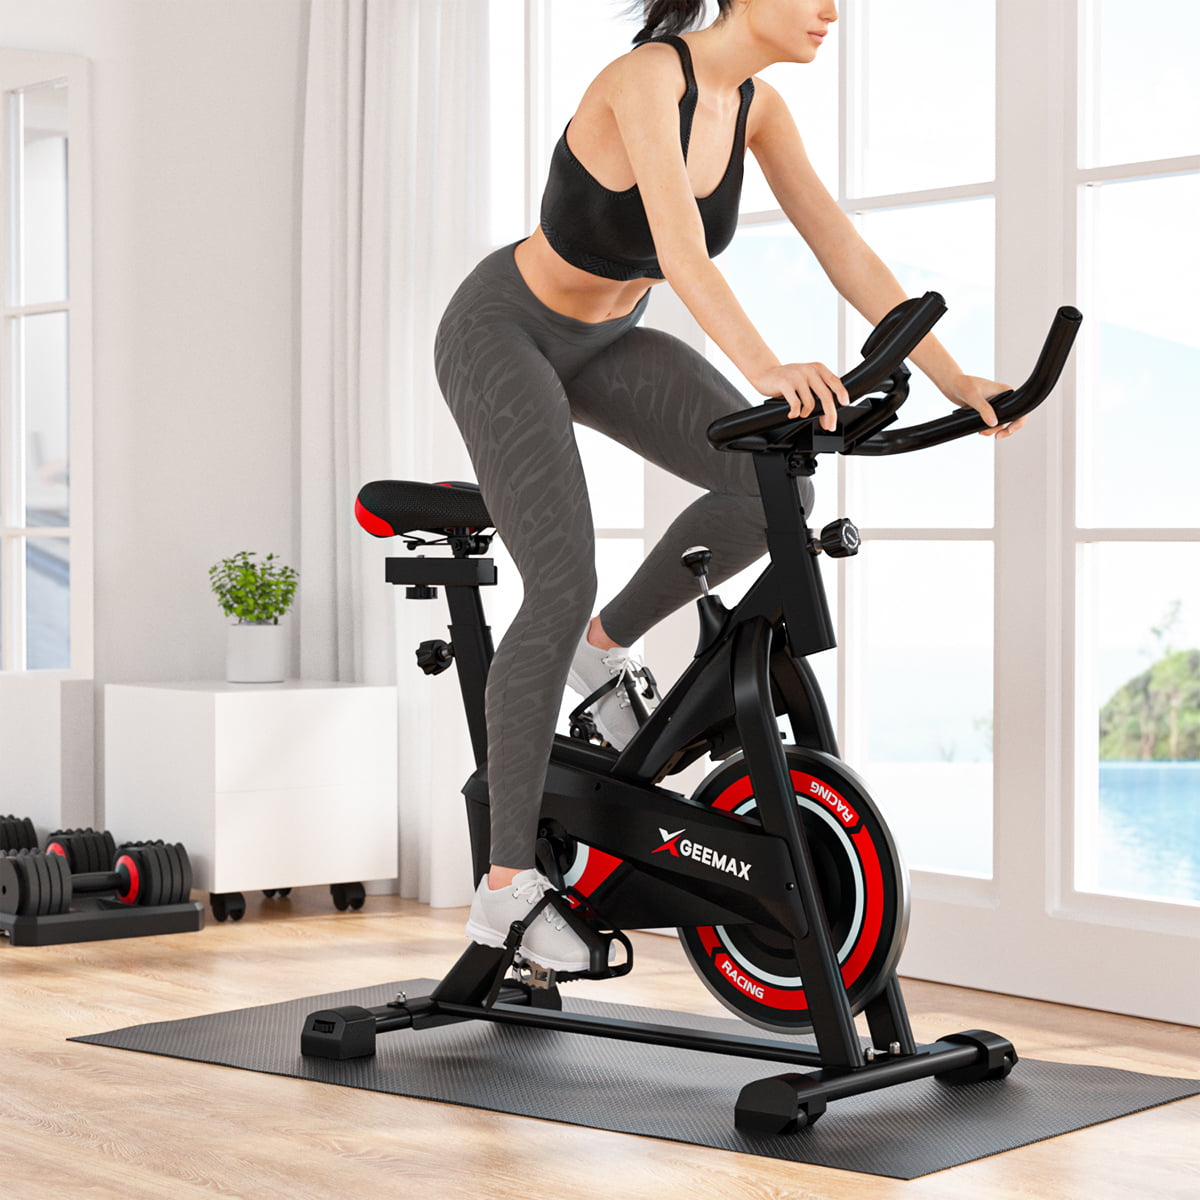 Bicycle Cycling Exercise Bike Stationary Fitness Cardio Indoor Home Workout Gym 